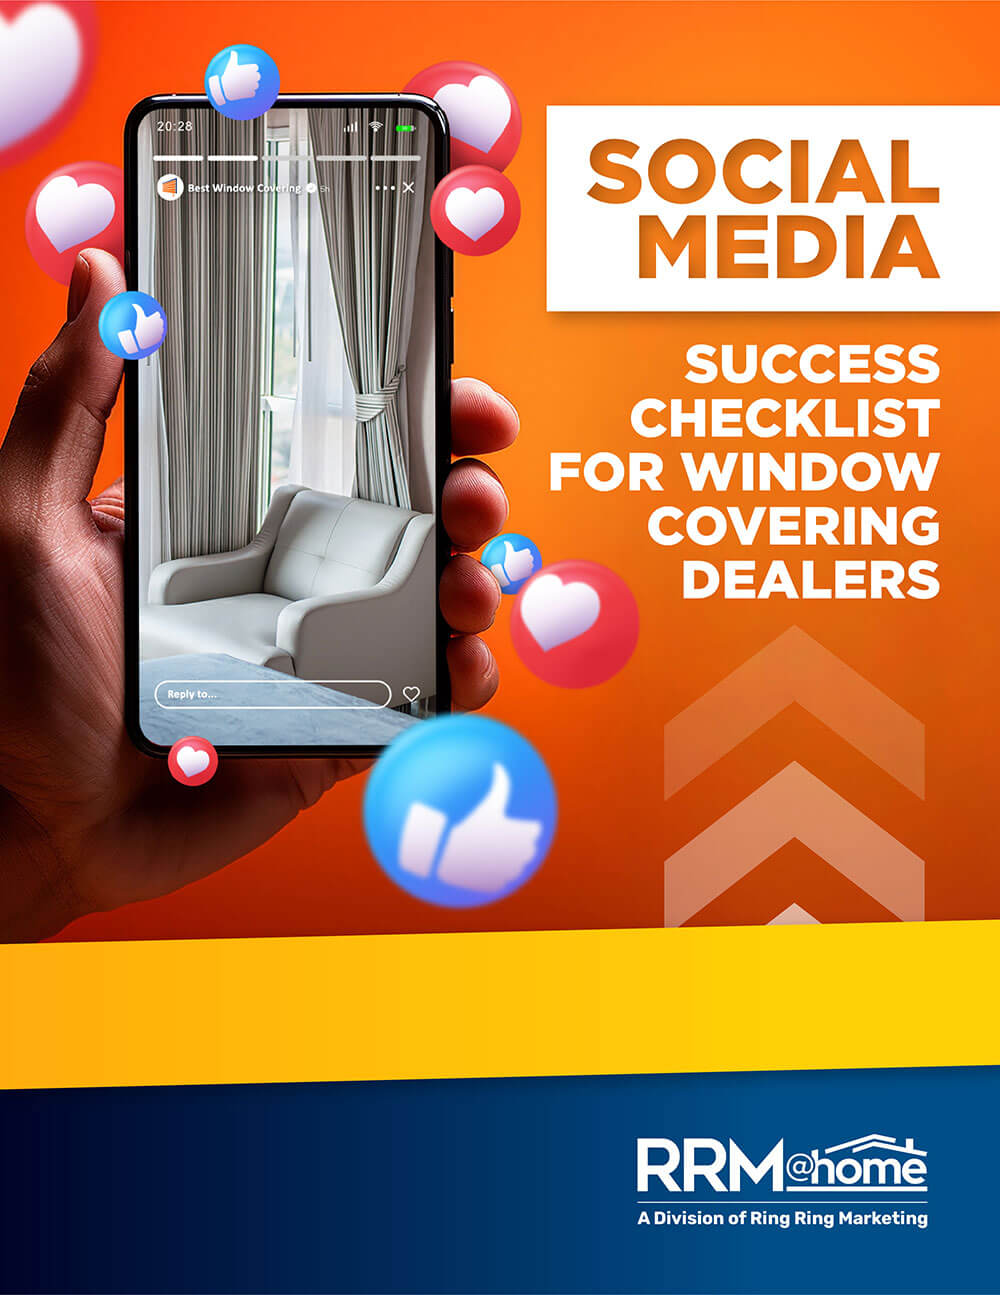 Social Media Success Checklist for Window Covering Dealers